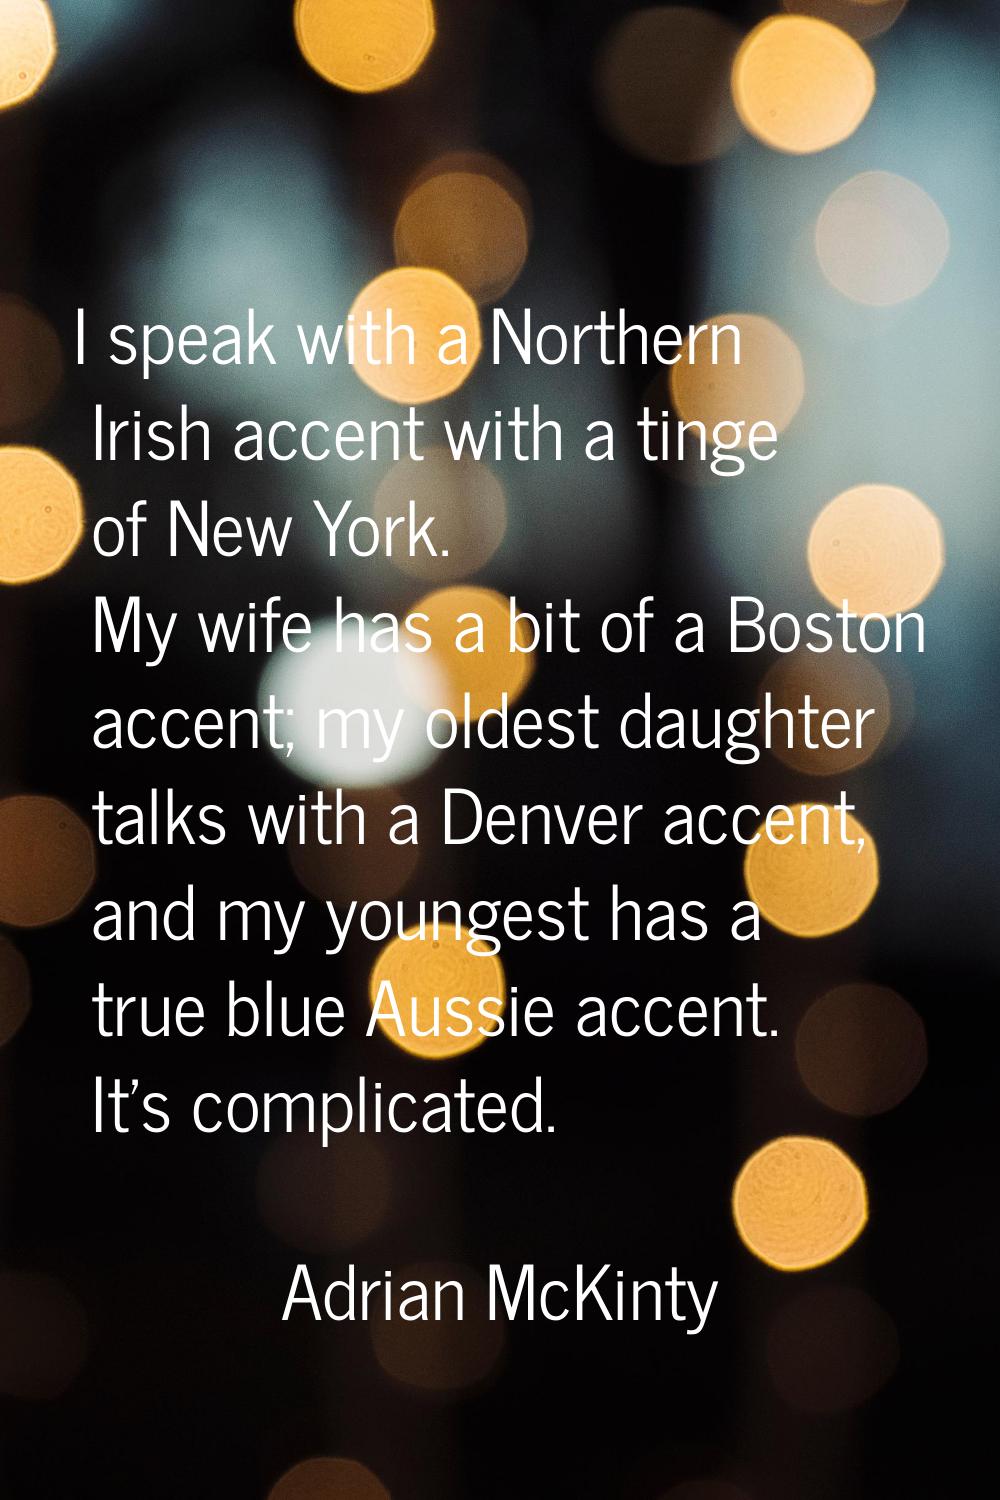 I speak with a Northern Irish accent with a tinge of New York. My wife has a bit of a Boston accent